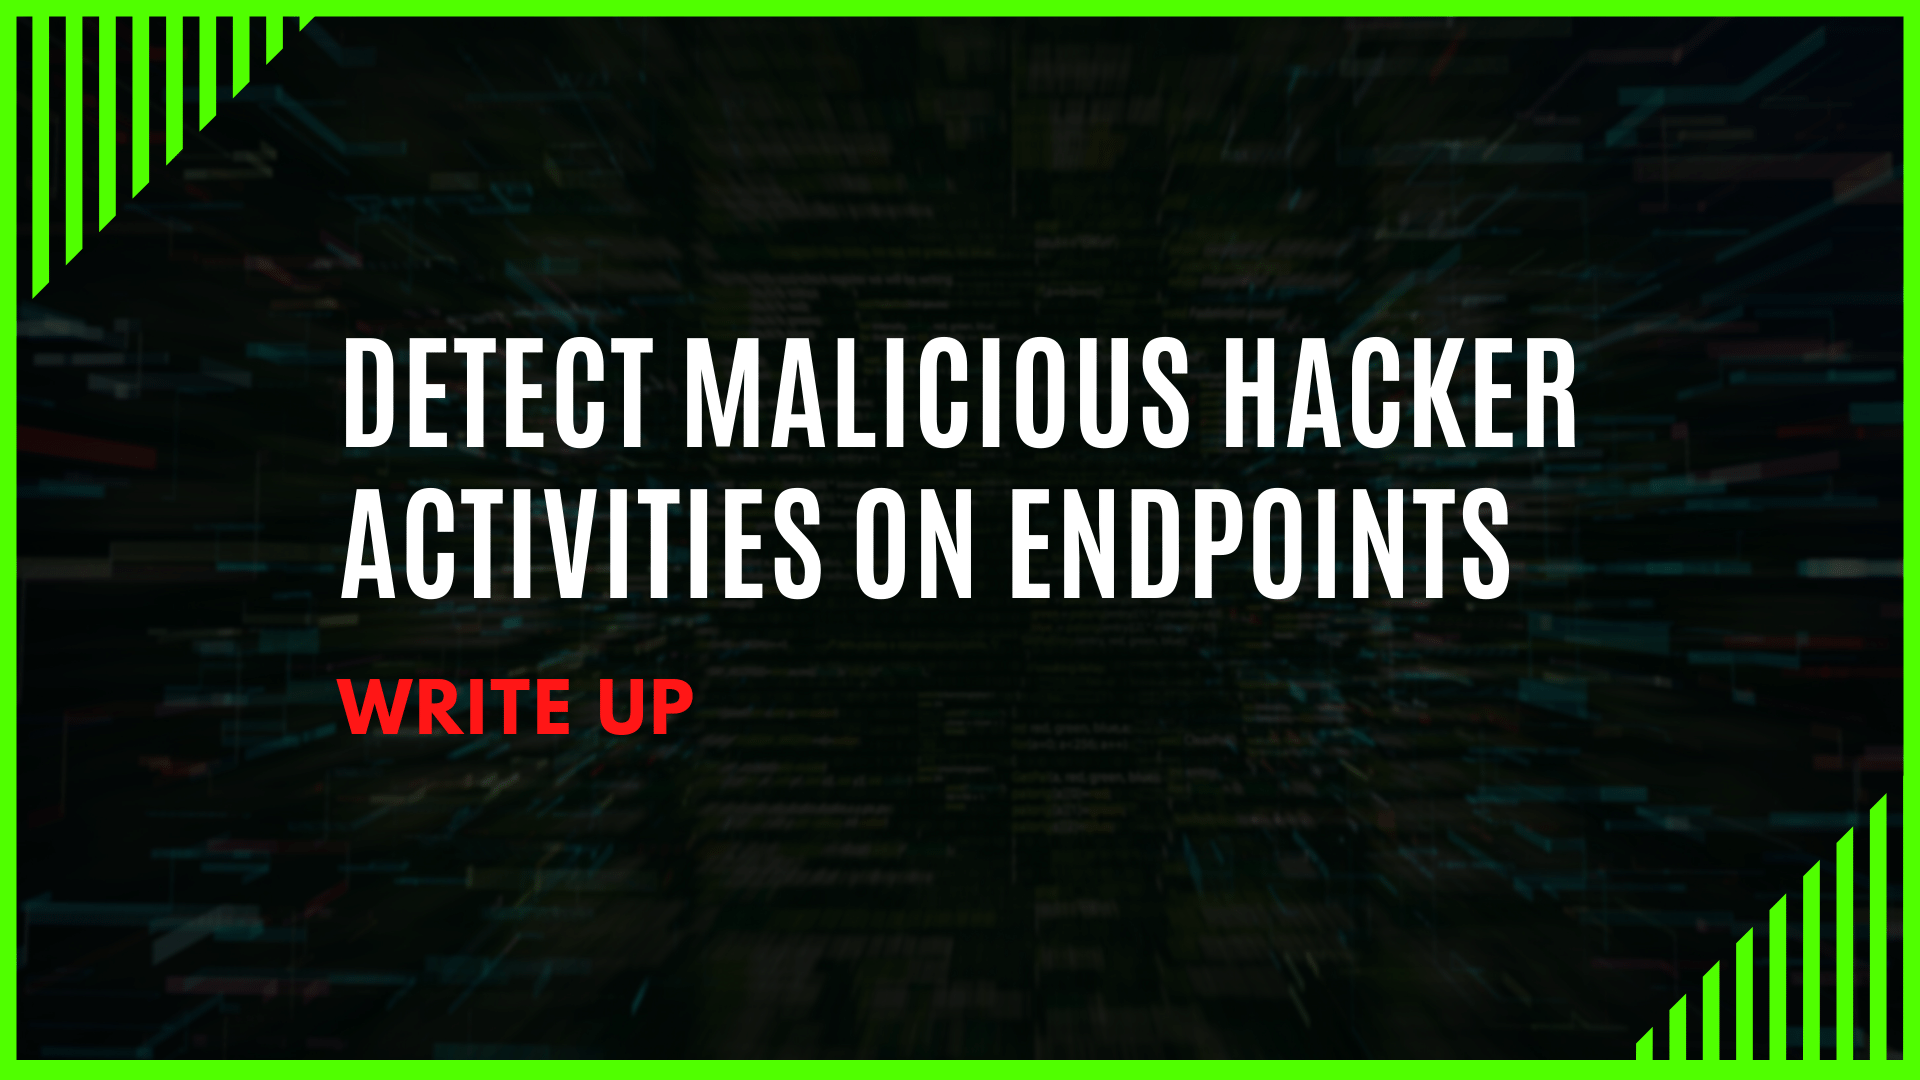 Detect malicious hacker activities on endpoints